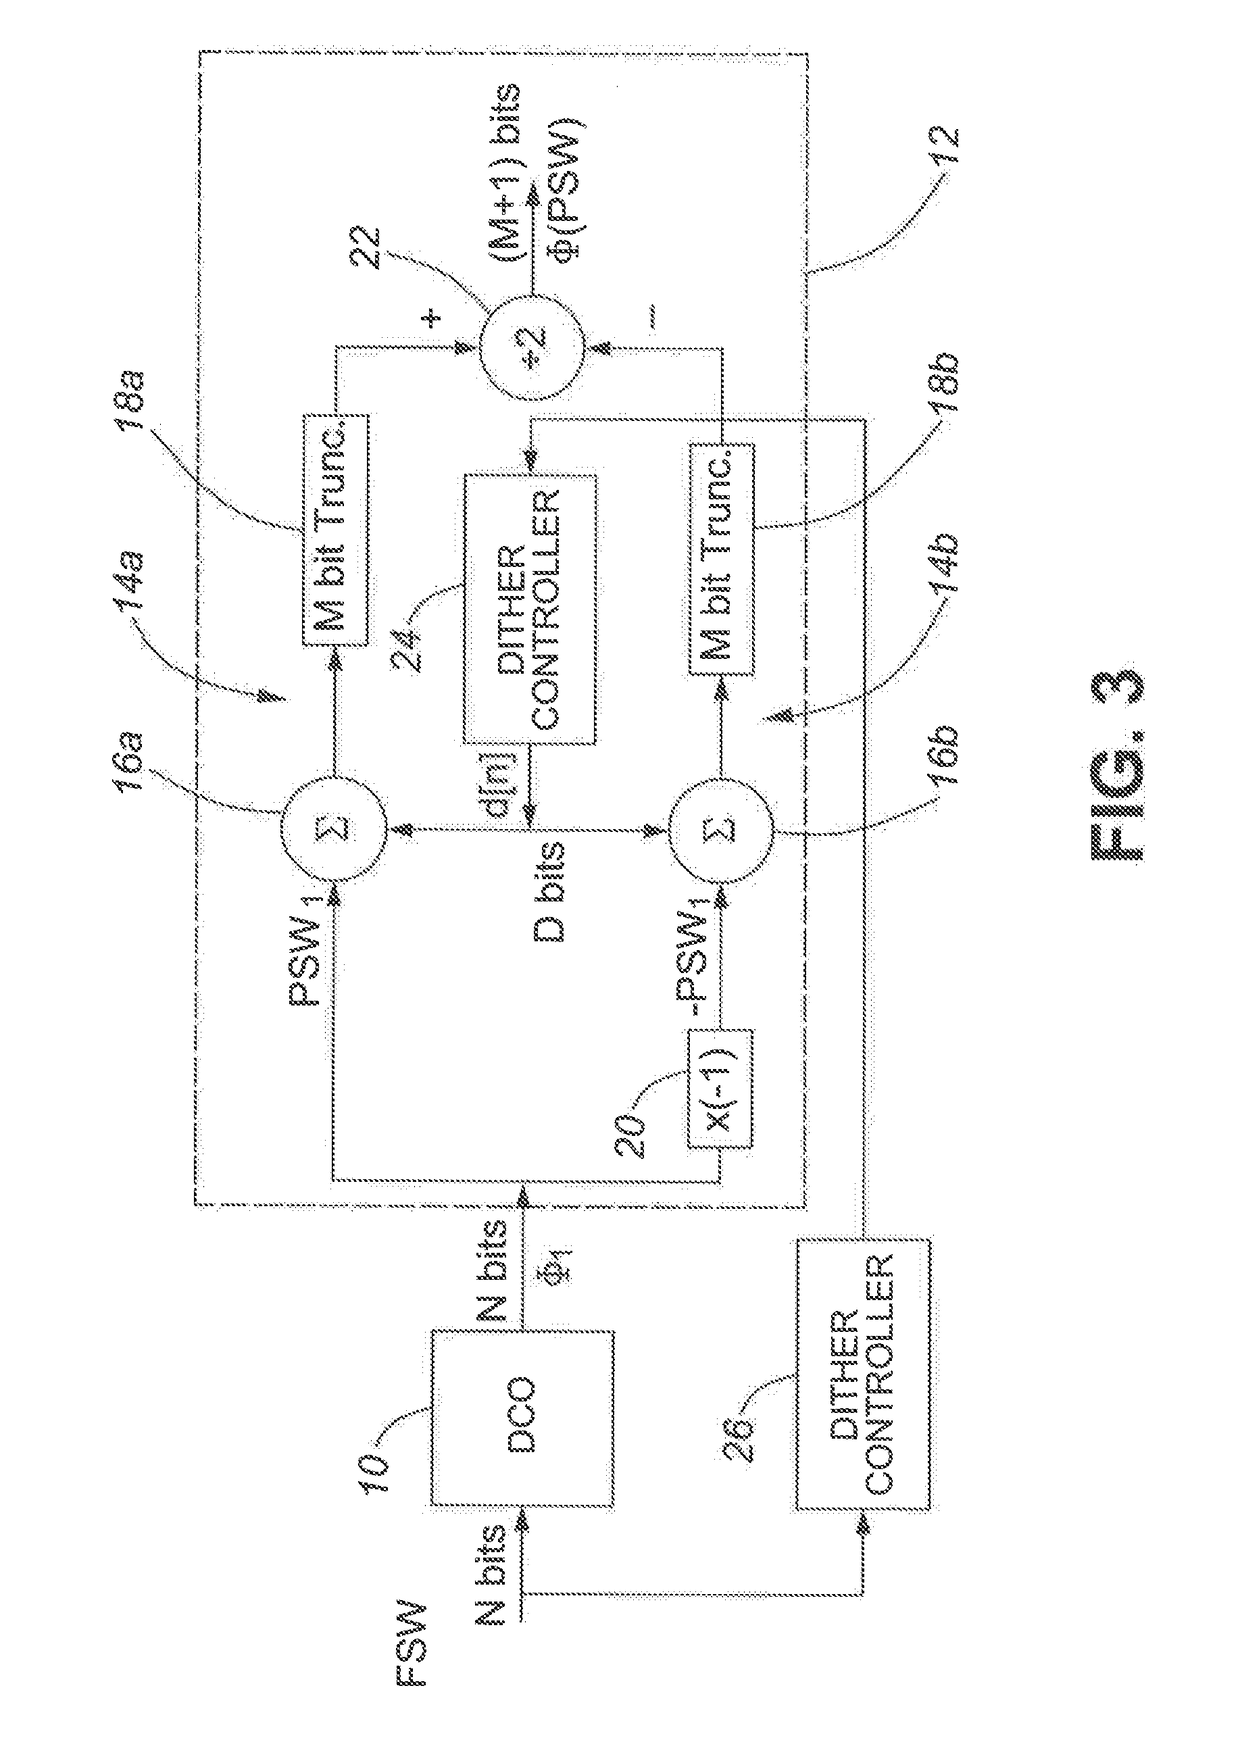 Noise reduction in non-linear signal processing